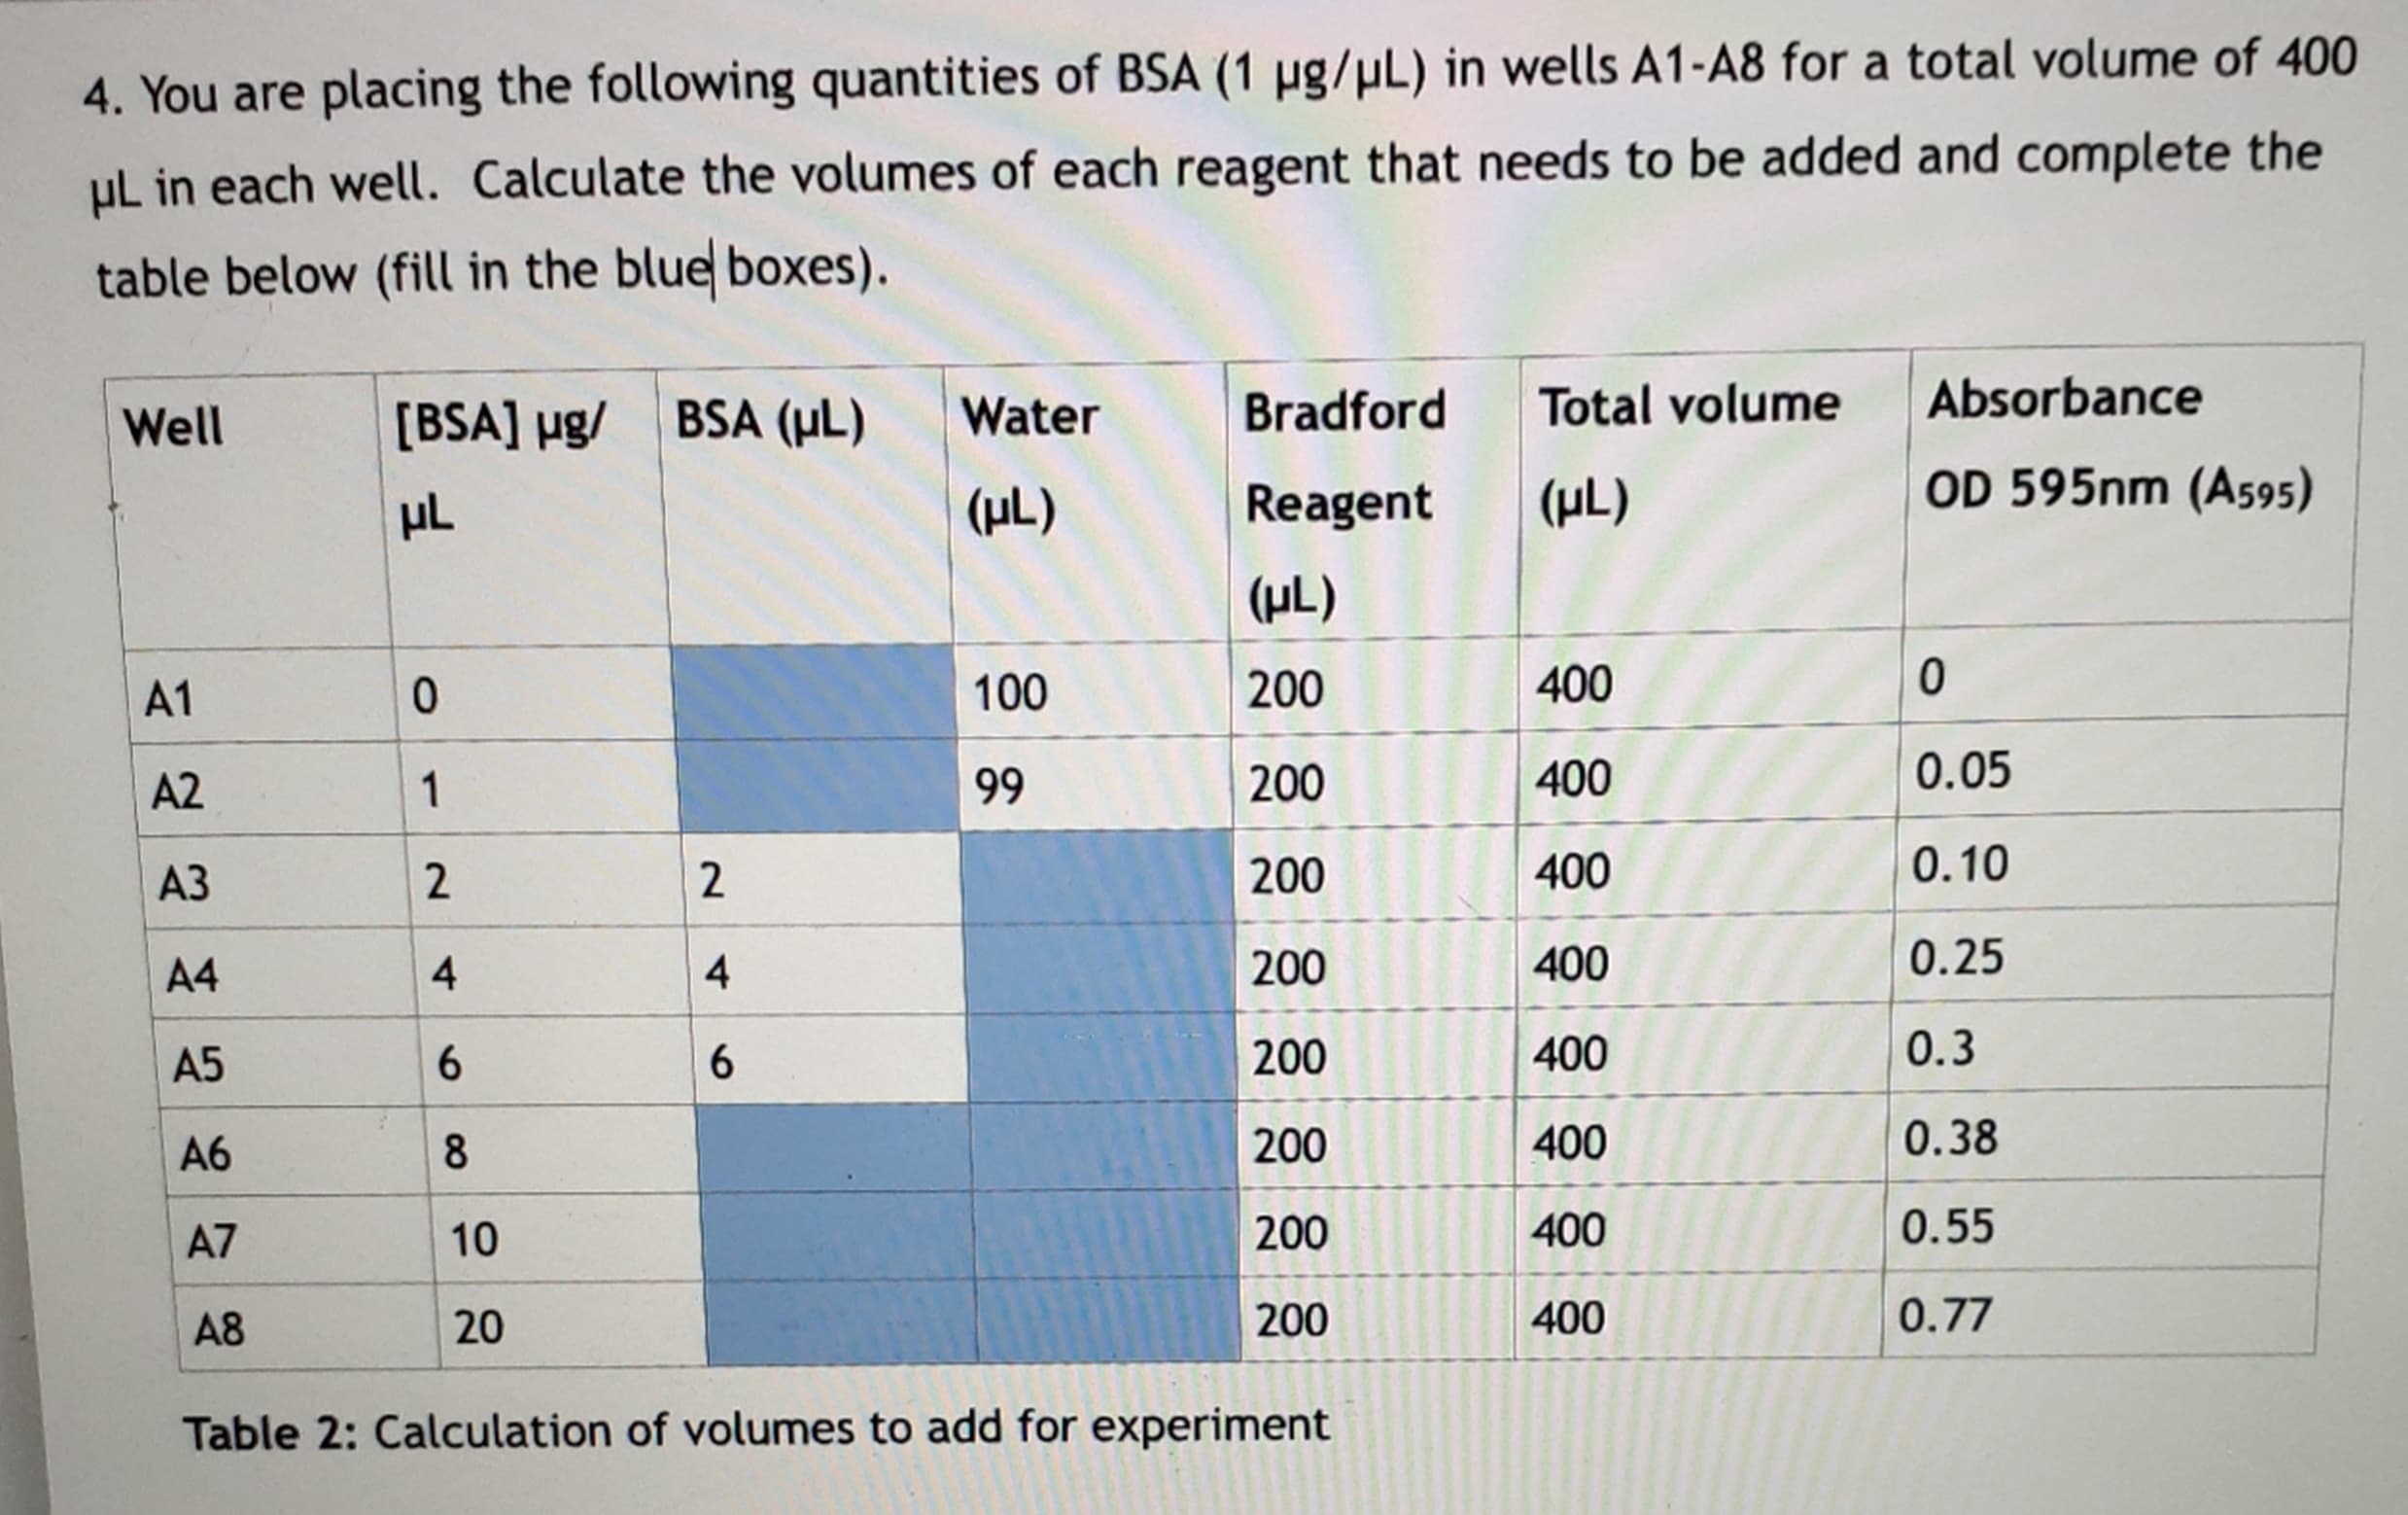 4. You are placing the following quantities of BSA (1 µg/µL) in wells A1-A8 for a total volume of 400
µL in each well. Calculate the volumes of each reagent that needs to be added and complete the
table below (fill in the blue boxes).
[BSA] µg/ BSA (µL)
Bradford
Total volume
Absorbance
Well
Water
(µL)
Reagent
(µL)
OD 595nm (A595)
(µL)
A1
100
200
400
A2
1
99
200
400
0.05
АЗ
2
200
400
0.10
A4
4
4
200
400
0.25
A5
6.
6.
200
400
0.3
A6
8
200
400
0.38
A7
10
200
400
0.55
A8
20
200
400
0.77
Table 2: Calculation of volumes to add for experiment
